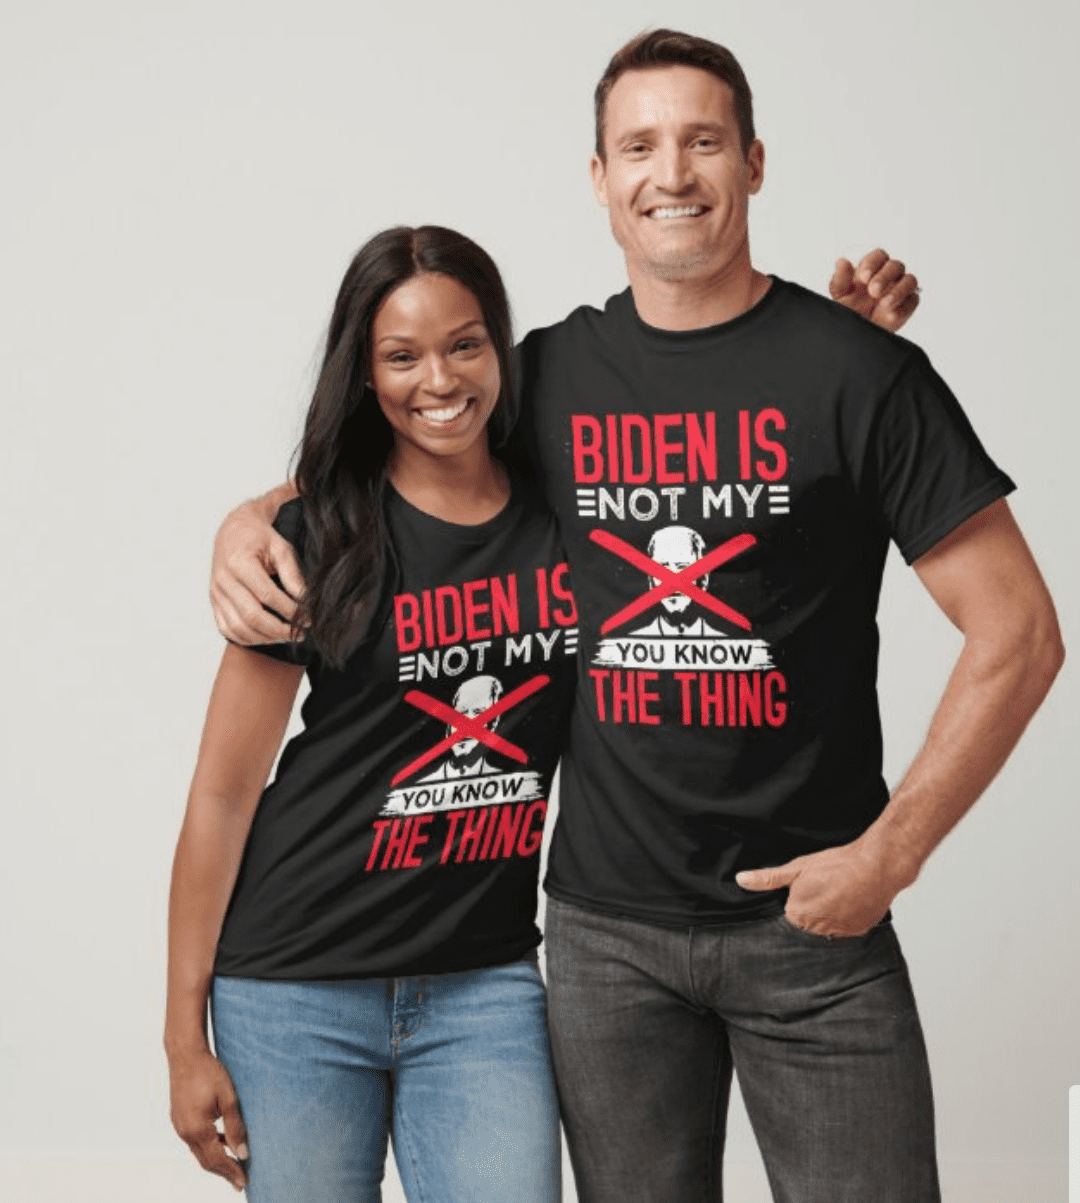 Biden Is Not My – You Know, The Thing